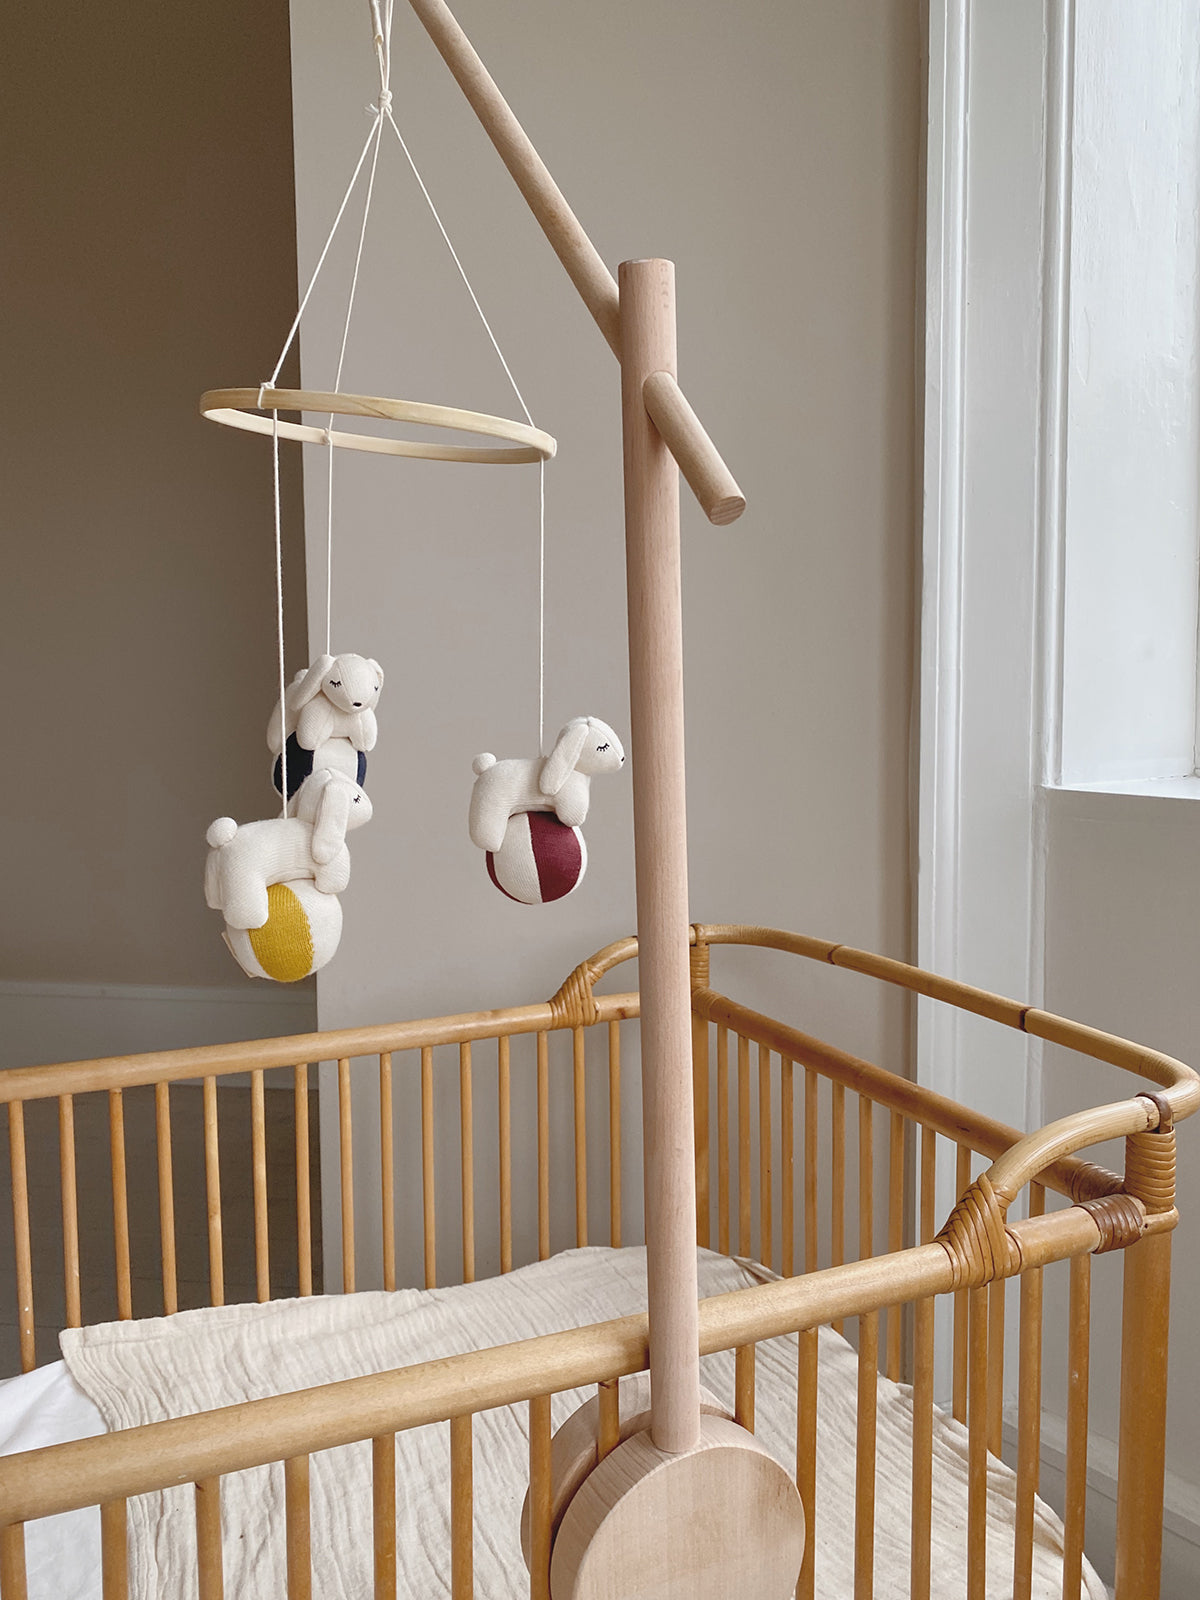 Baby Bed Wooden Mobile Arm, Baby Mobile Stand, Baby Mobile, Nursery Mobile